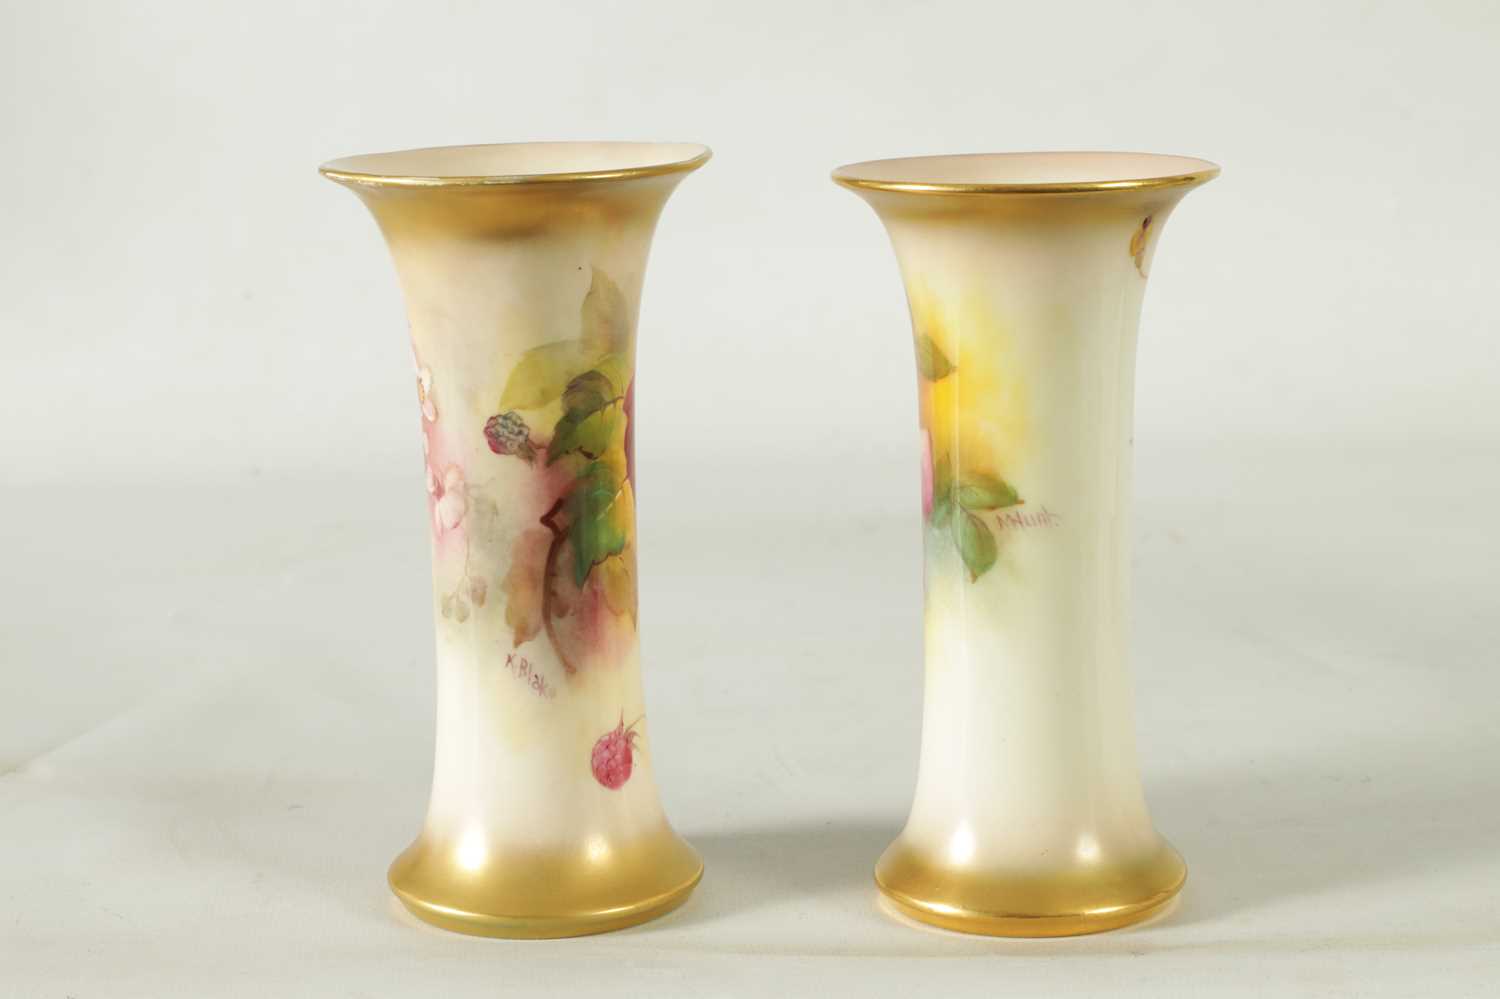 TWO EARLY 20TH CENTURY ROYAL WORCESTER SPILL VASES DECORATED IN AUTUMN BERRIES SIGNED KITTY BLAKE AN - Image 3 of 8